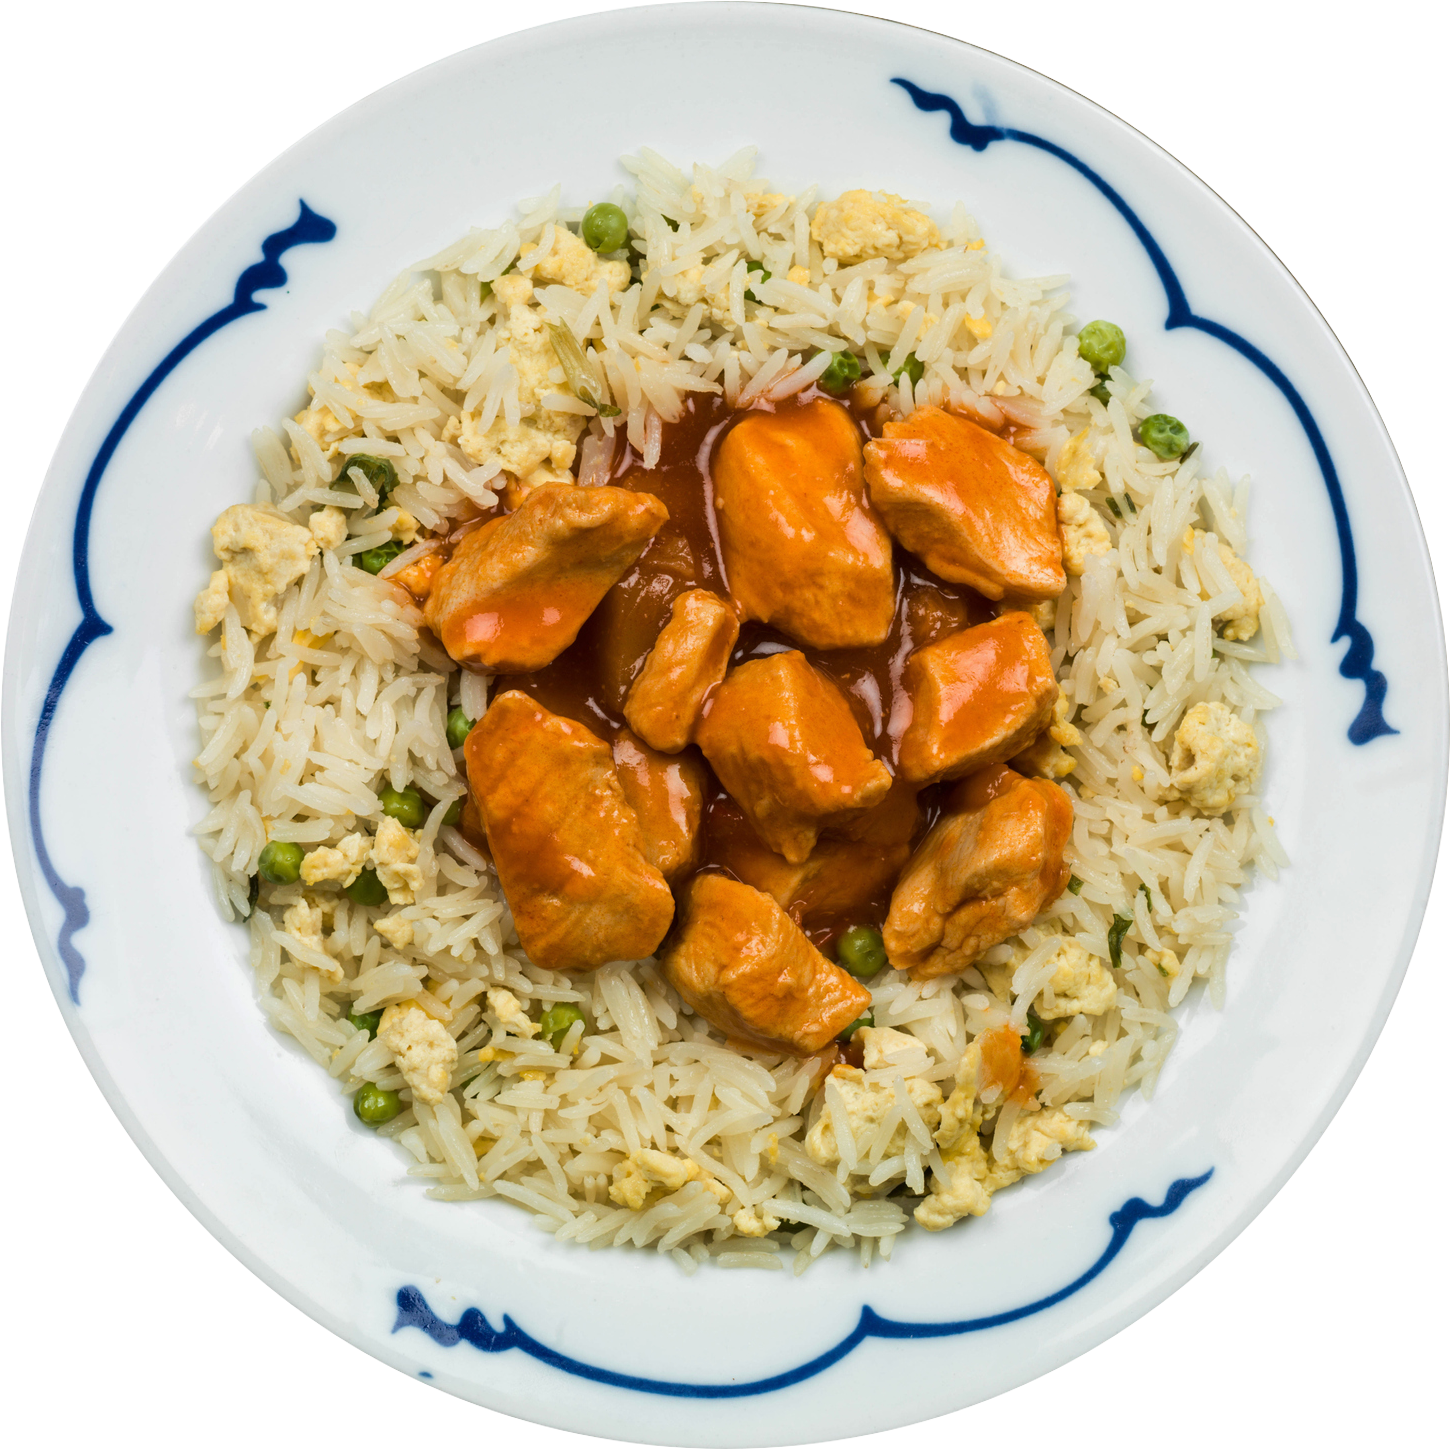 Marinated chicken with spices served over a bed of fluffy white rice.